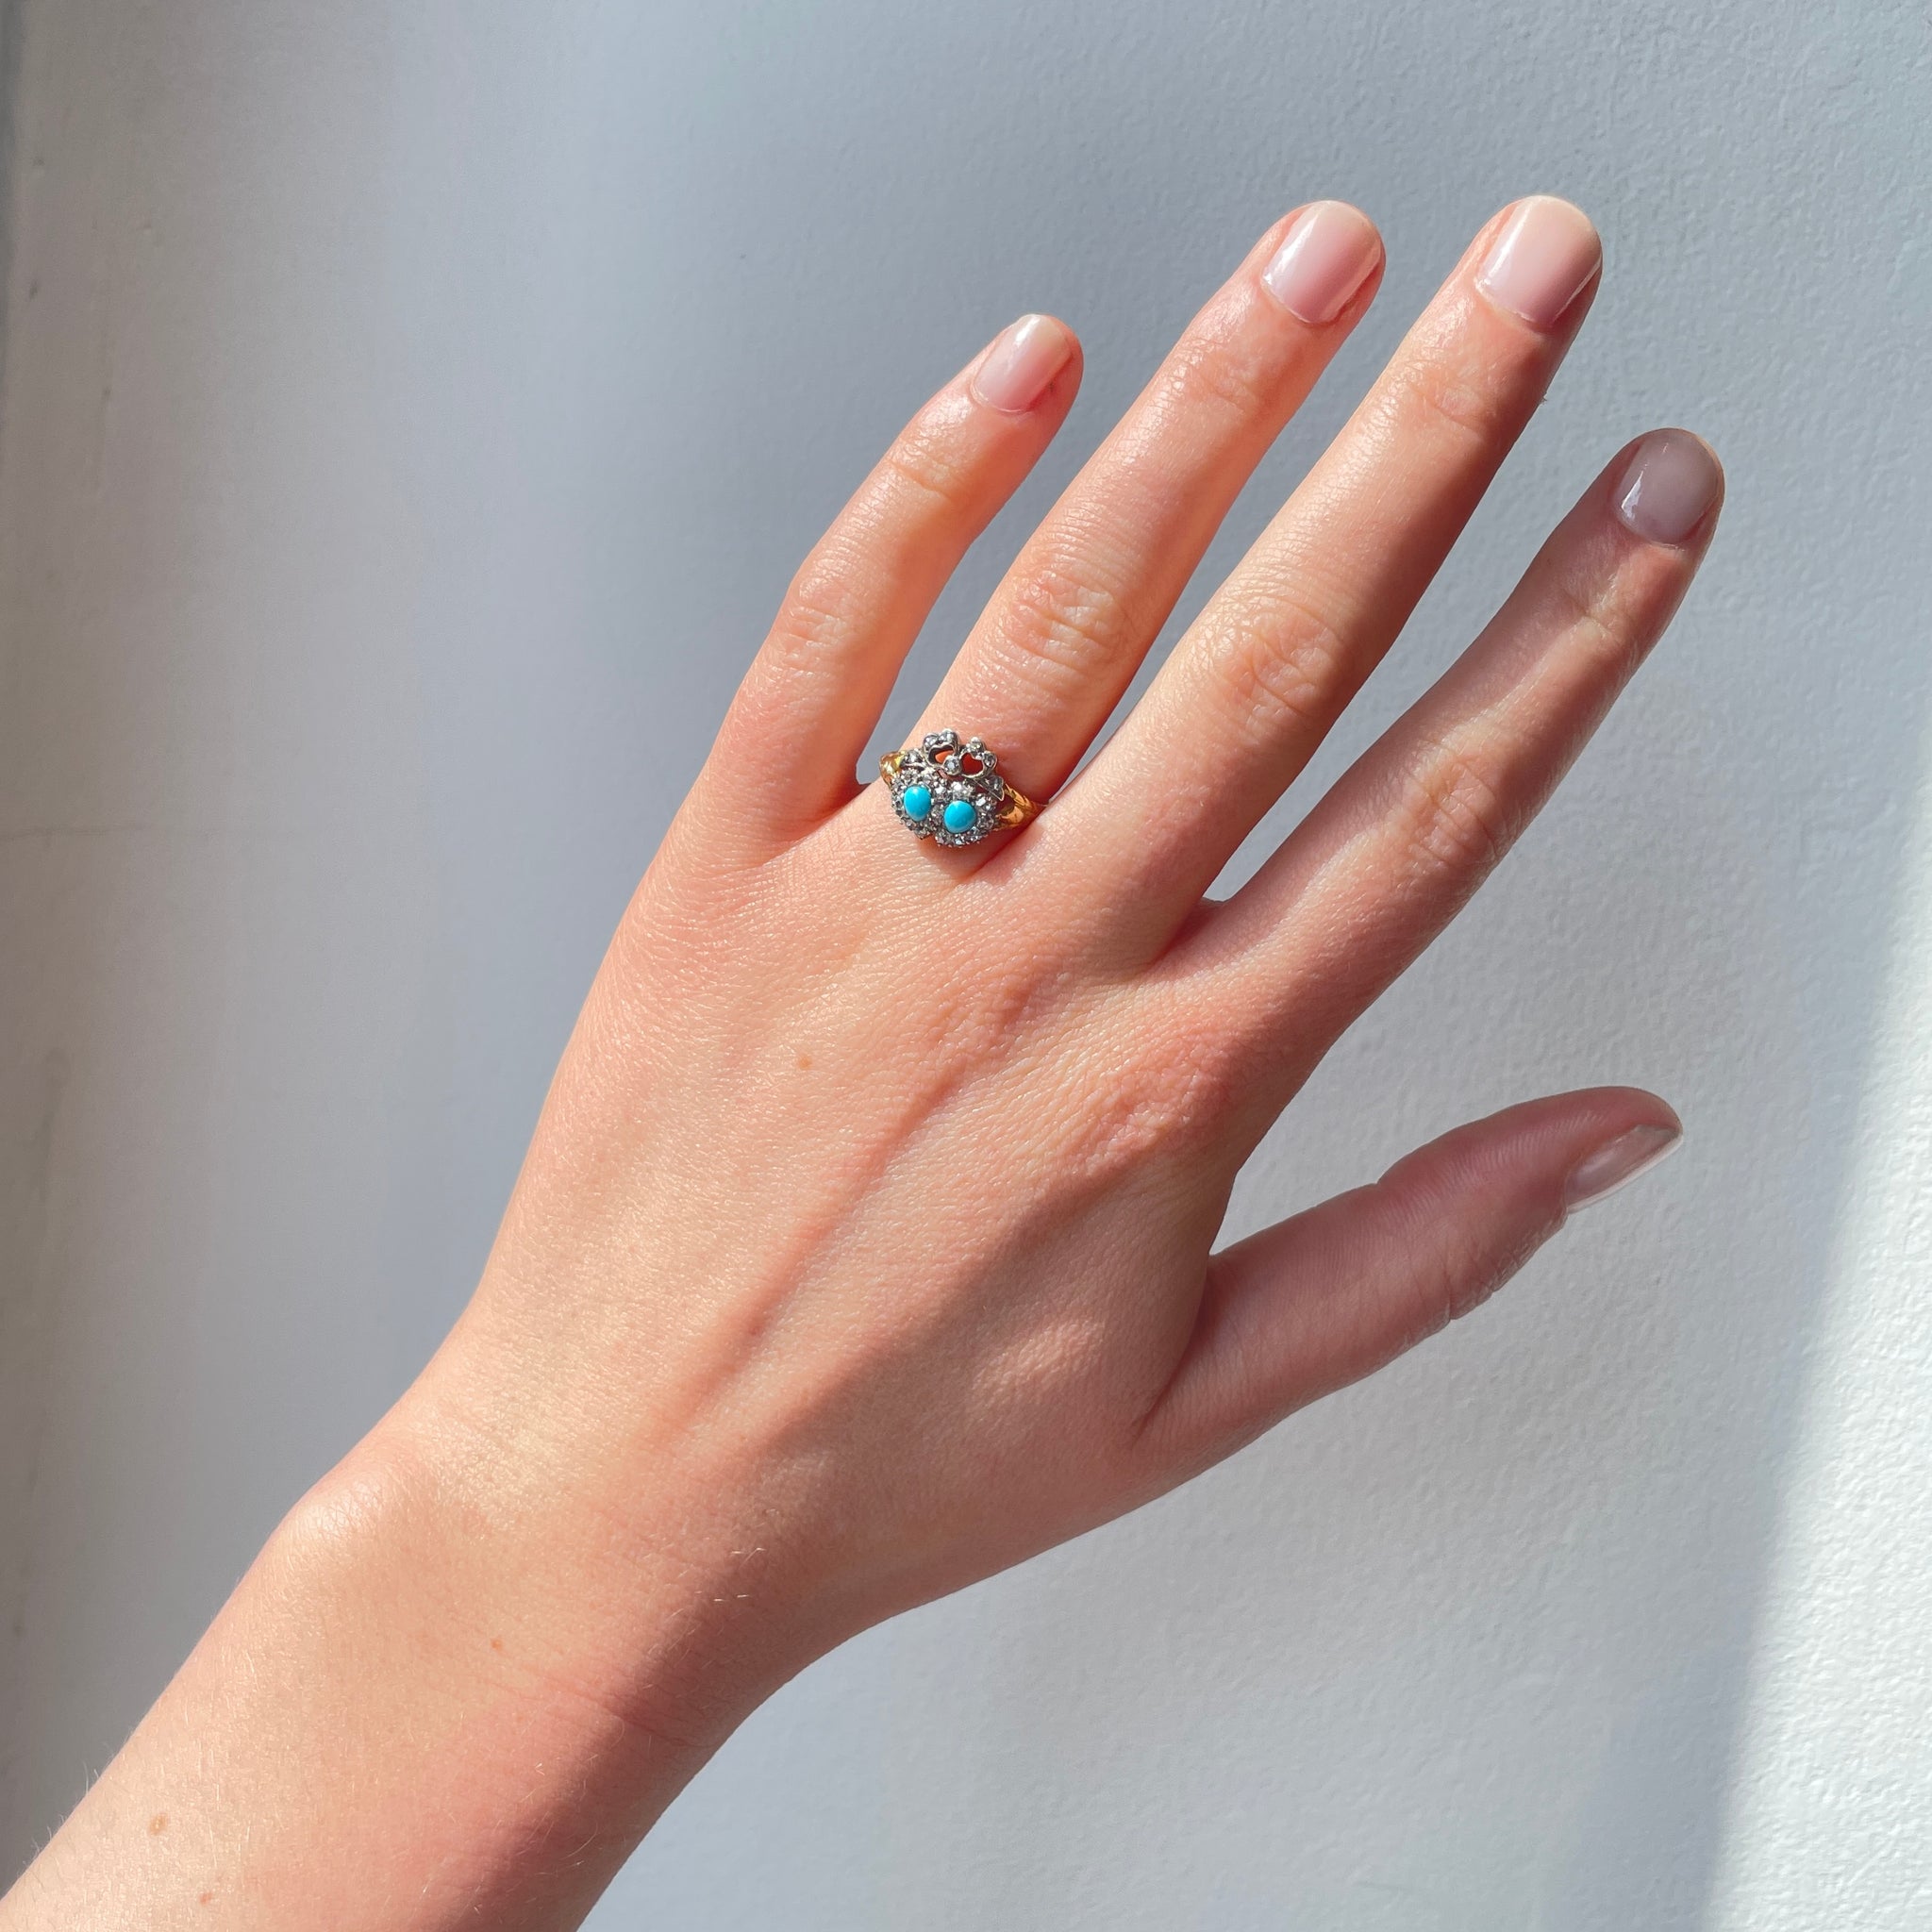 Victorian Turquoise and Diamond Heart Ring